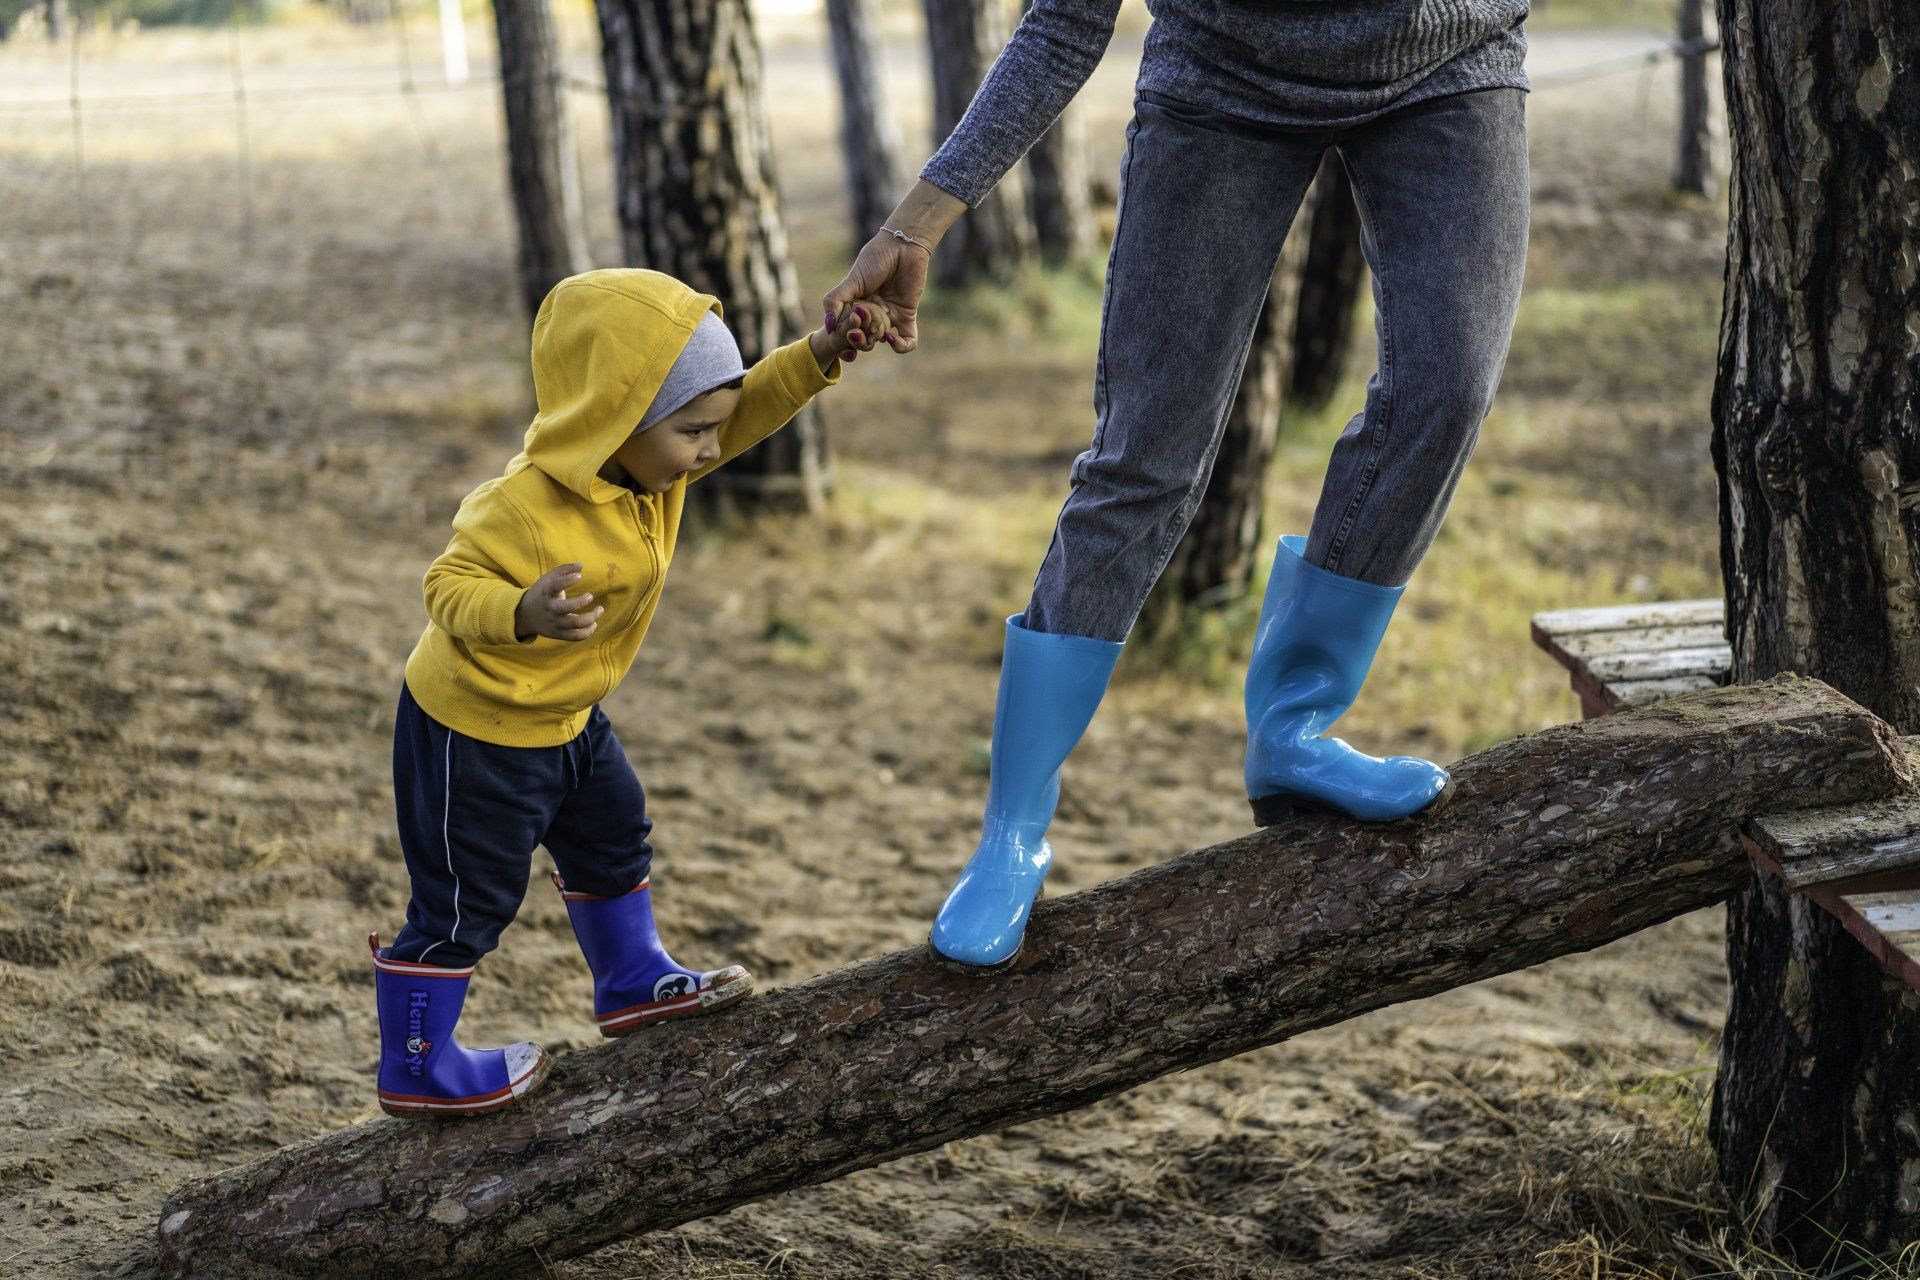 A woman is helping a little boy climb a log in the woods.